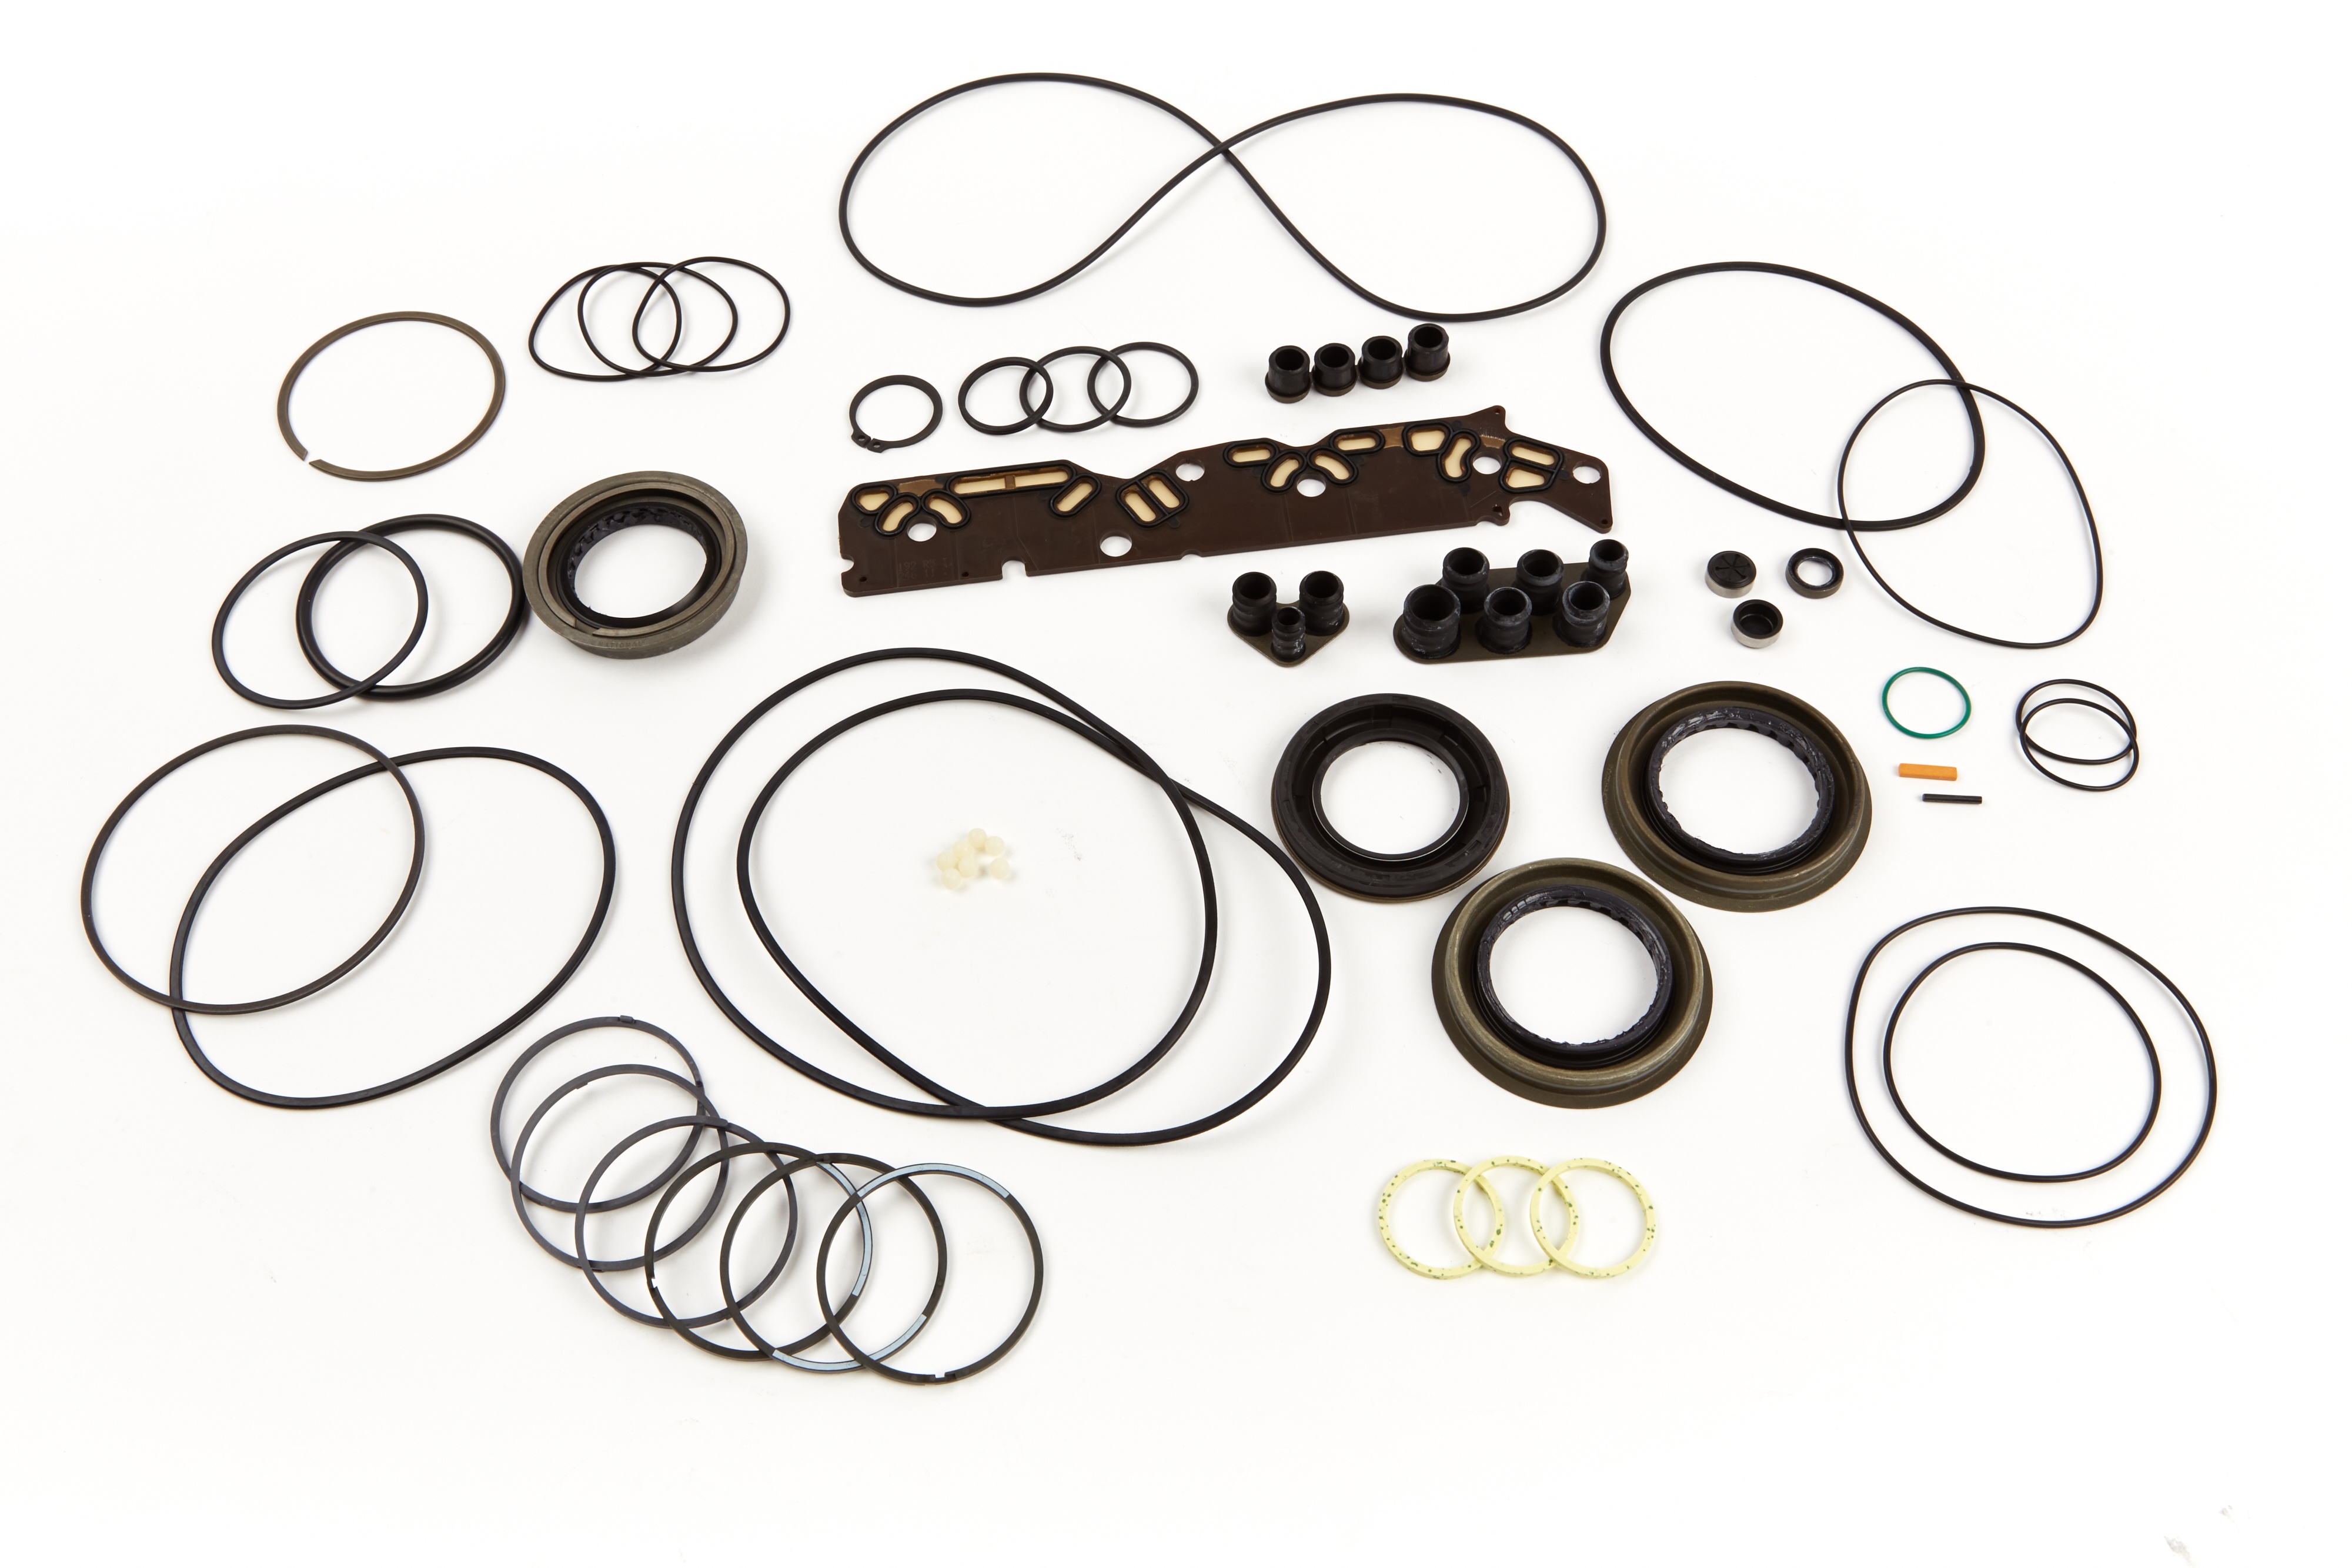 GM GENUINE PARTS - Automatic Transmission Seals and O-Rings Kit - GMP 24260142